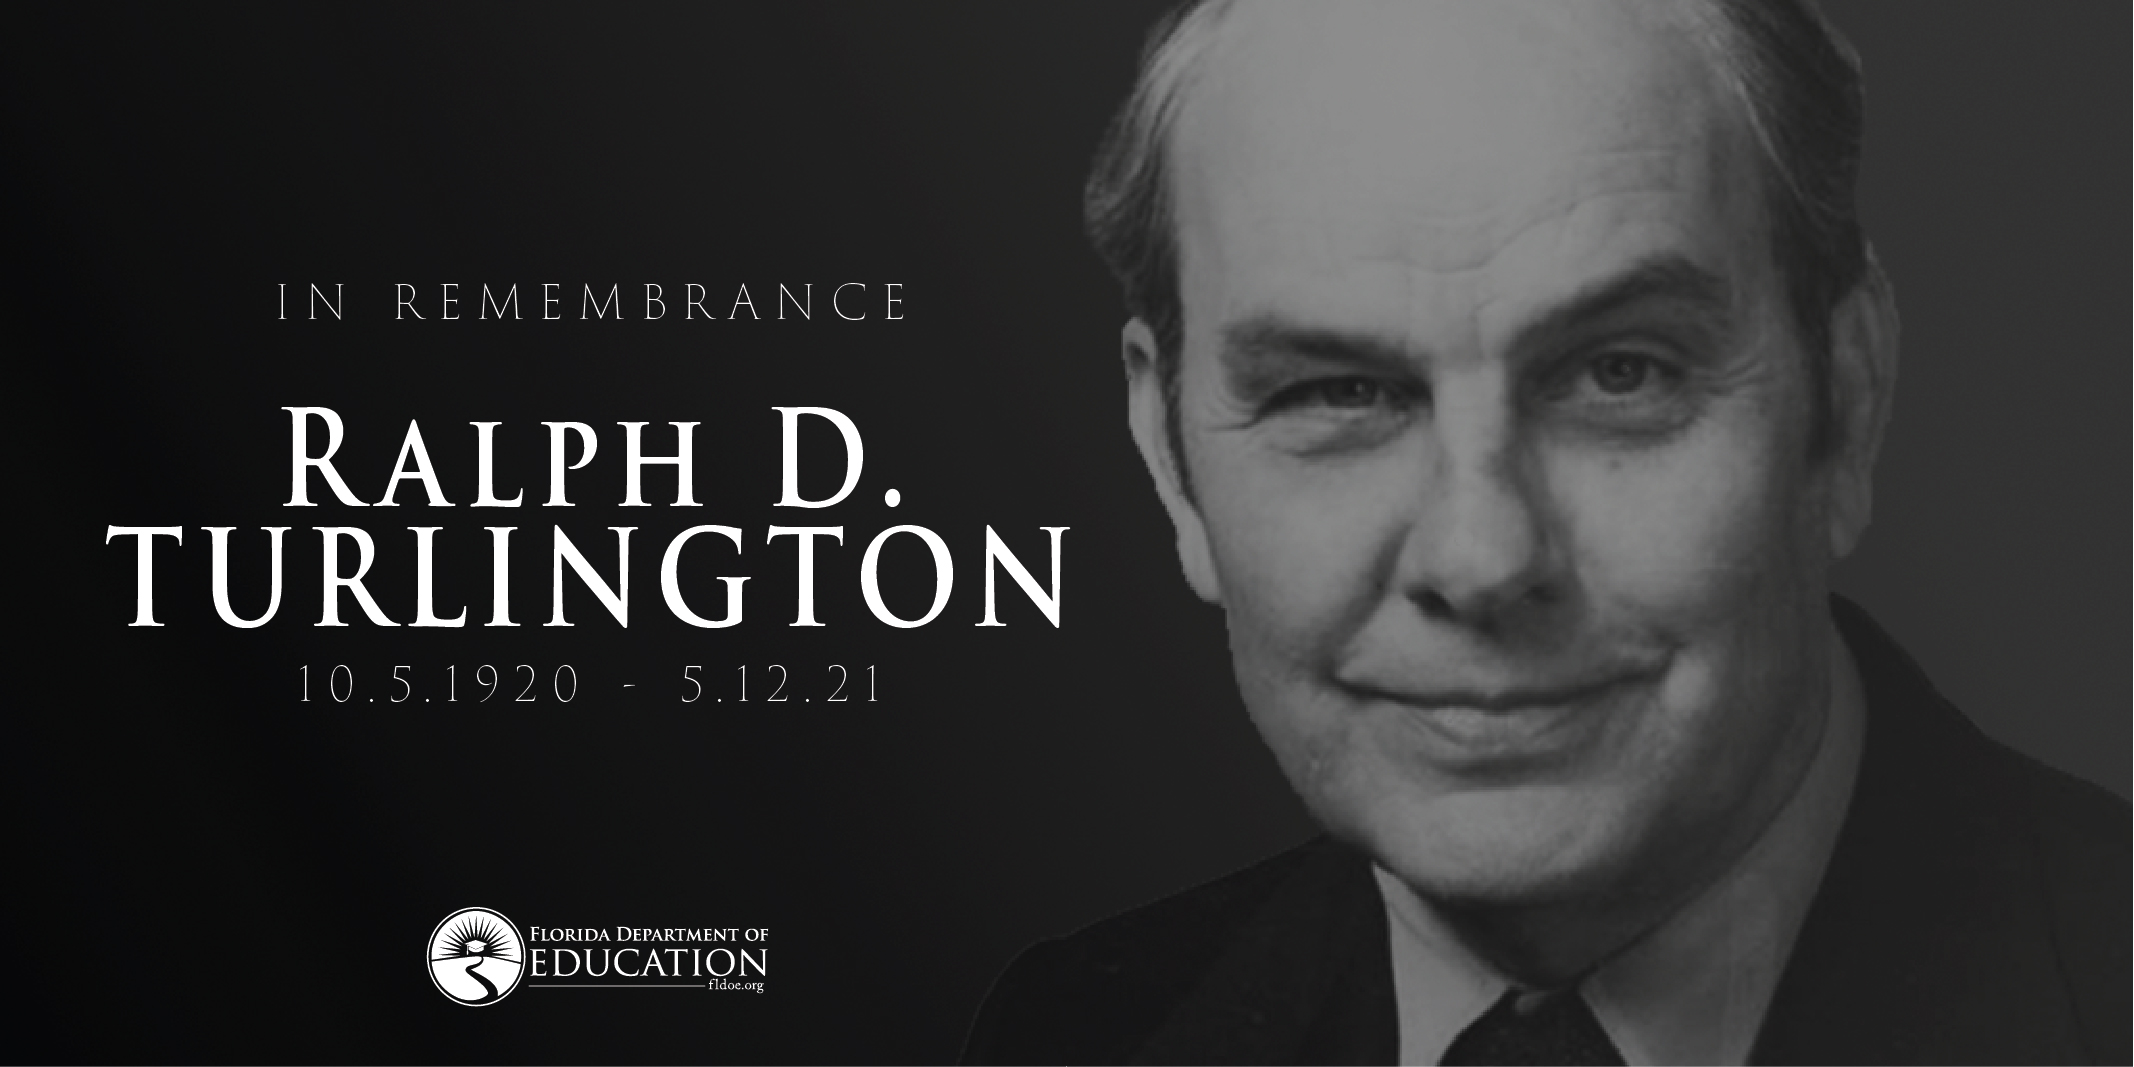 In Remembrance of Ralph D. Turlington